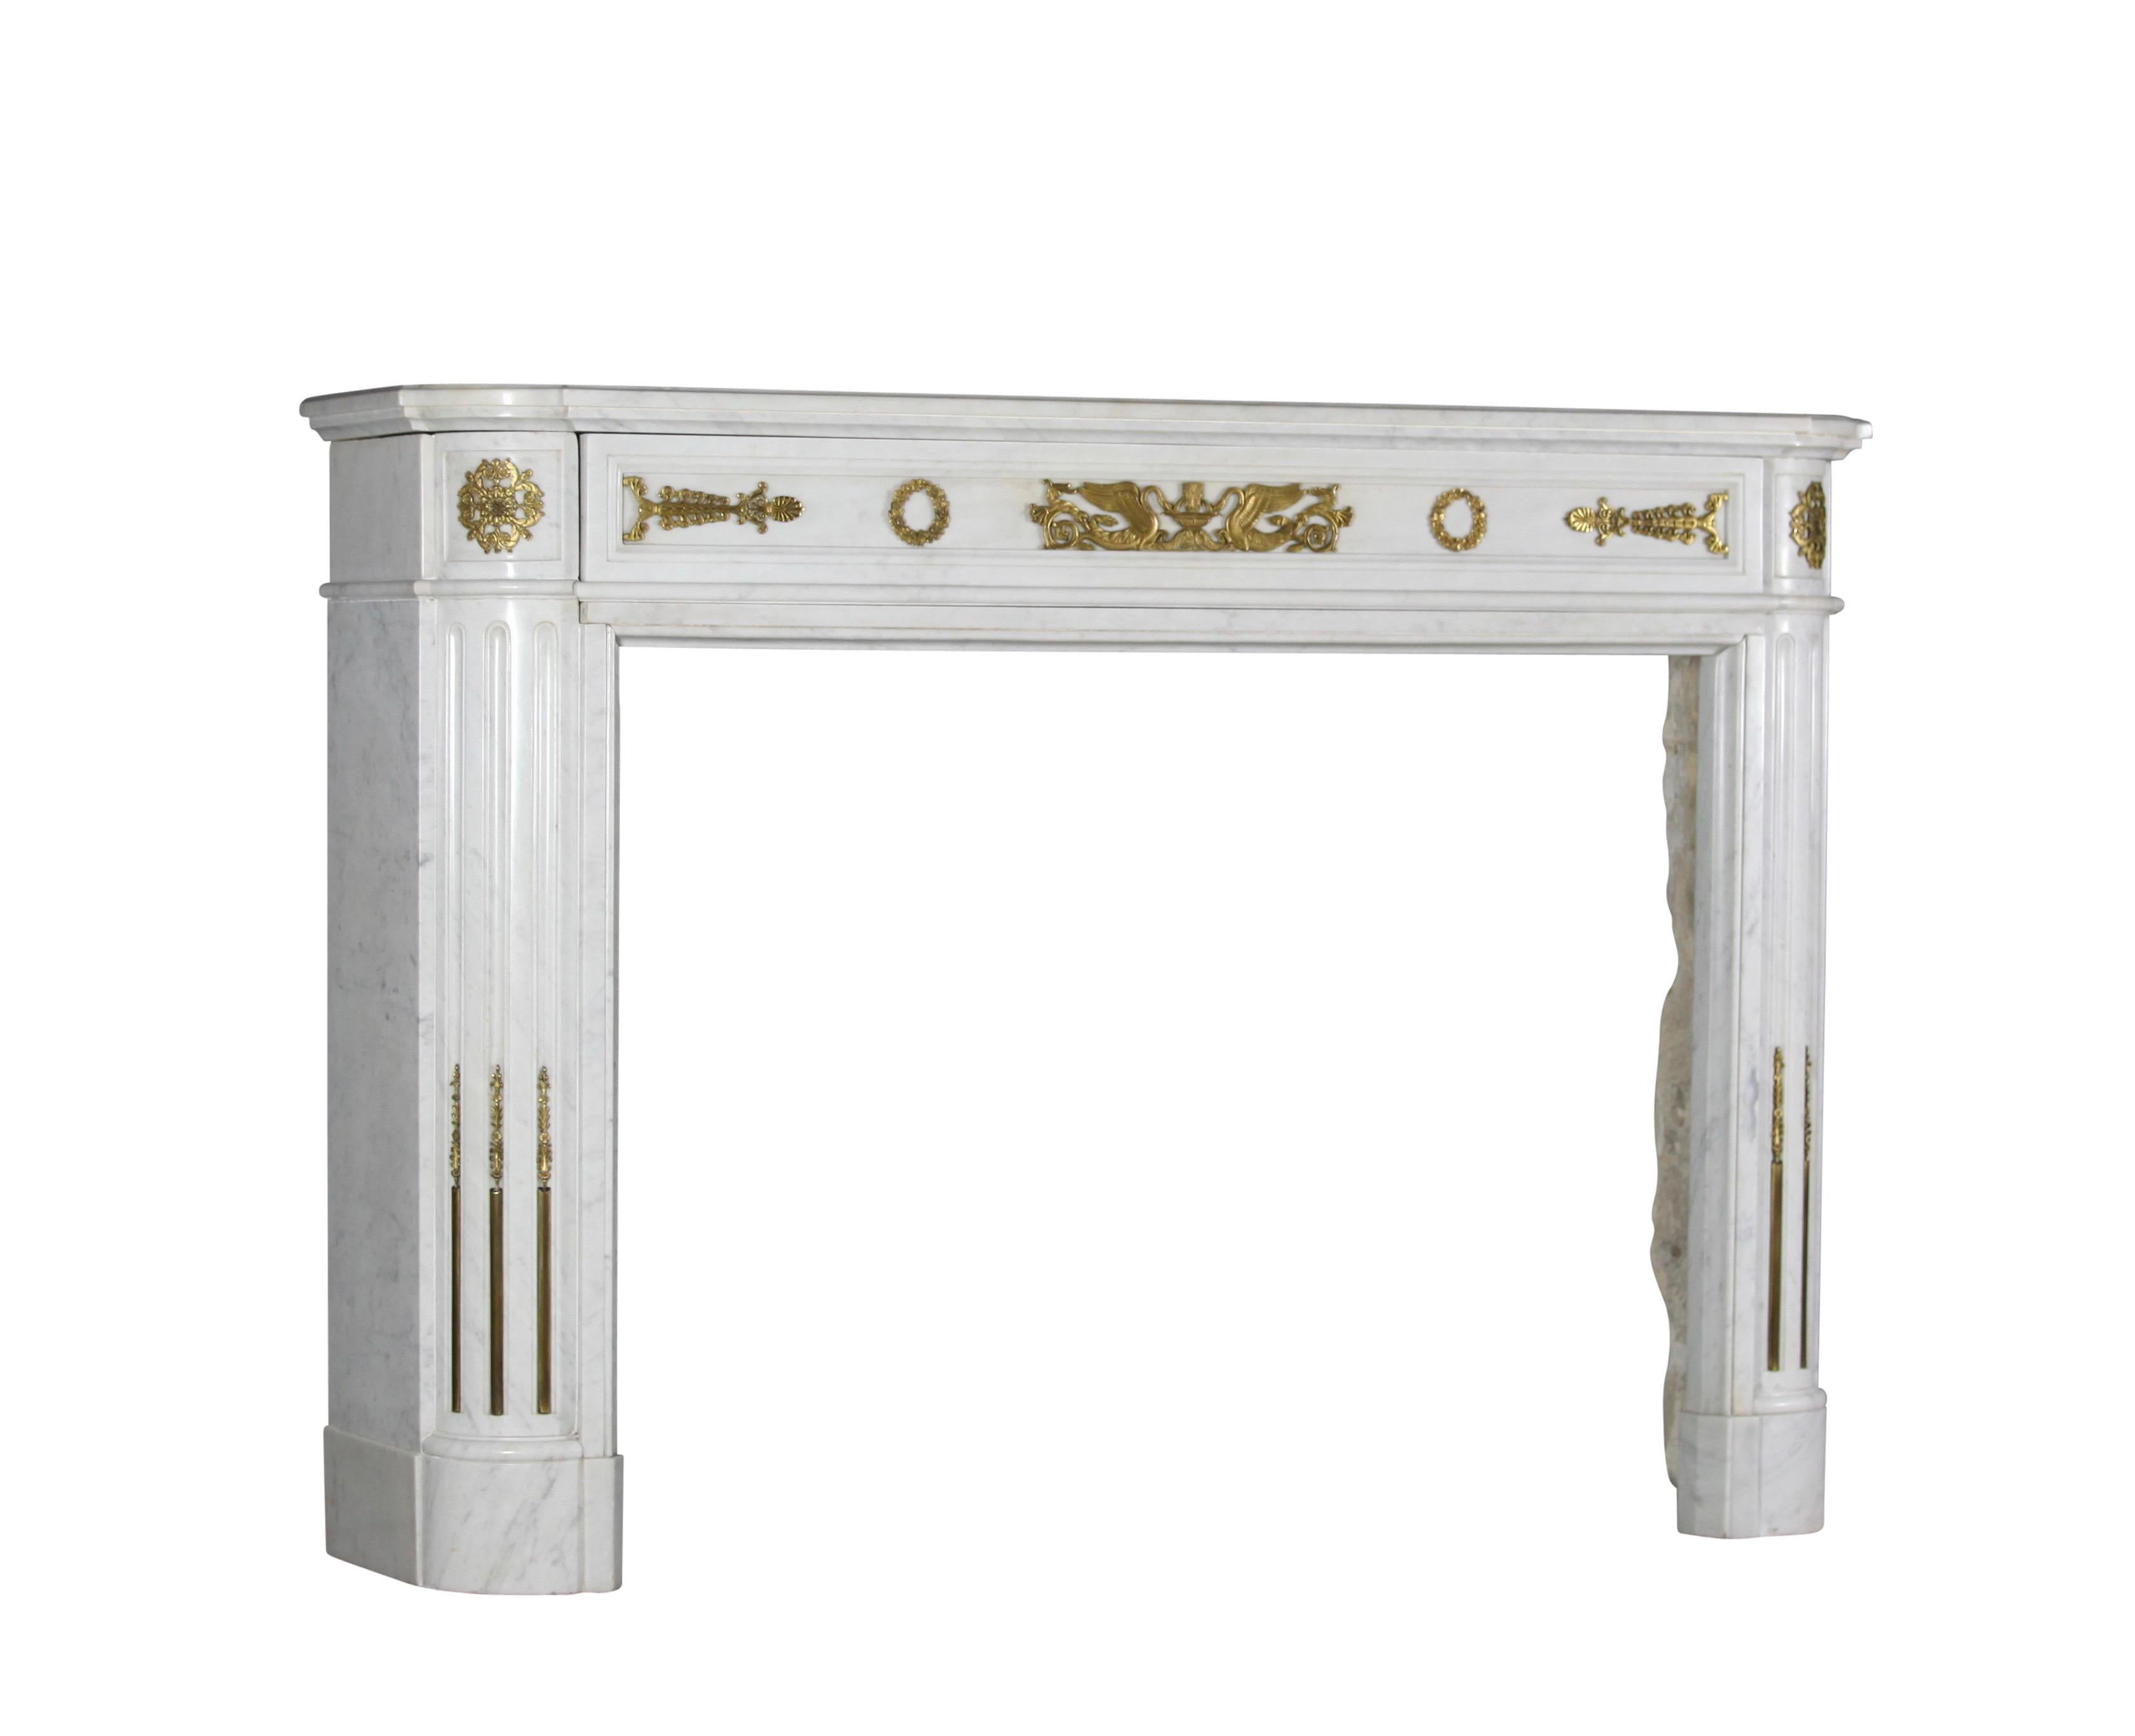 French Fine 19th Century European Original Antique Fireplace Mantle from Empire Period For Sale